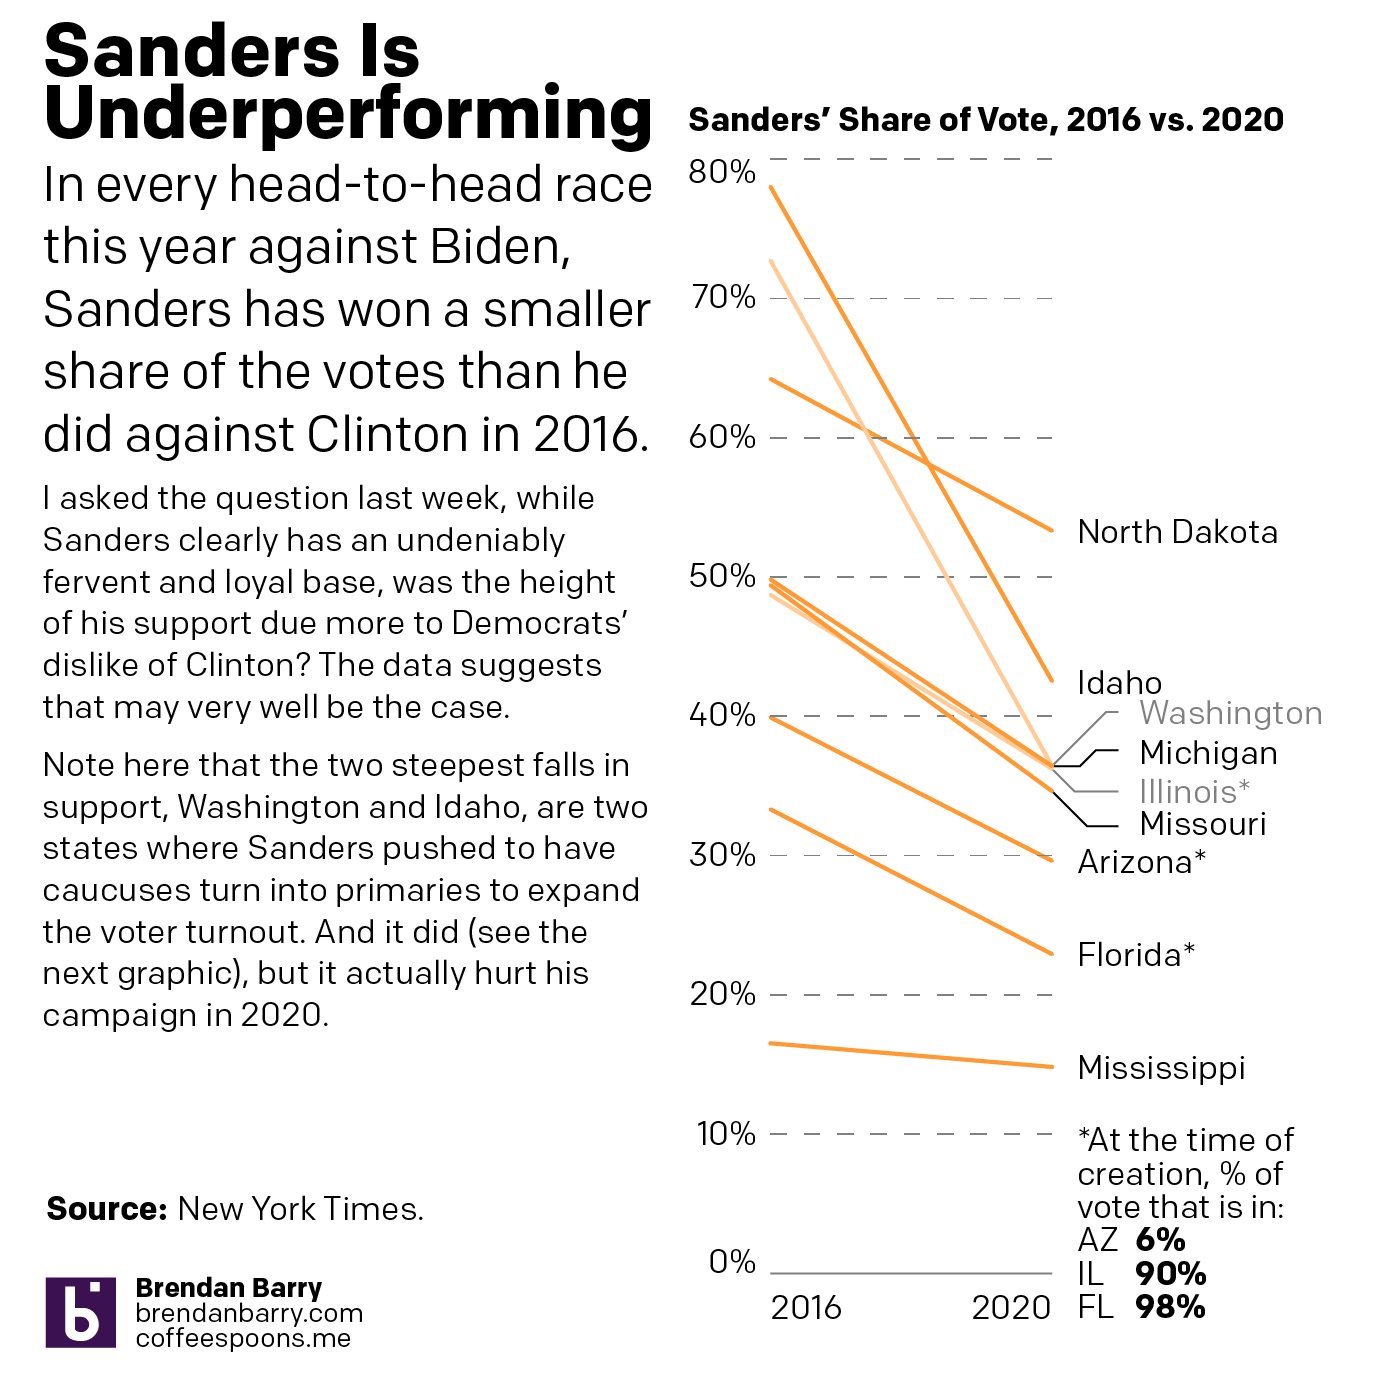 Sanders underperformed in every head-to-head match up this year relative to his numbers against Clinton in 2016